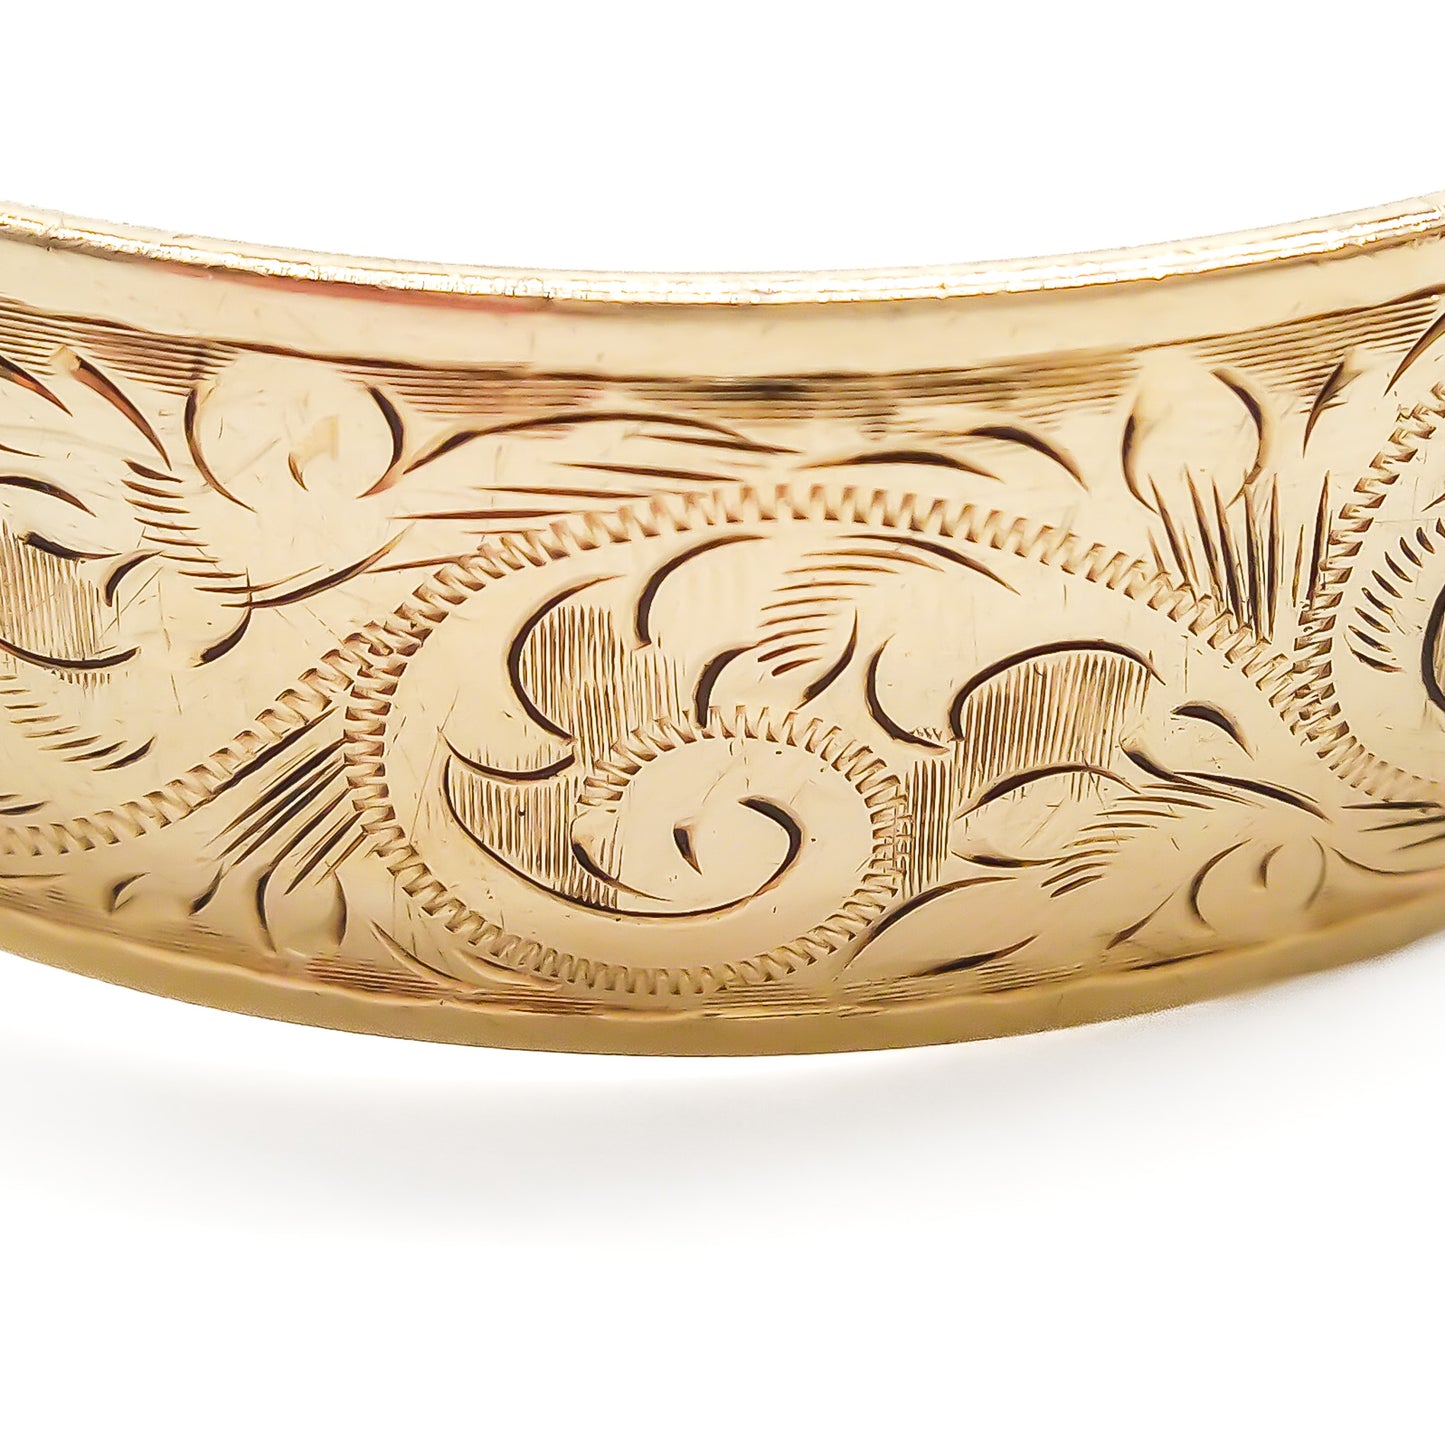 Beautifully engraved 9ct yellow gold bangle with a bronze core. Safety chain attached. Circa 1940’s